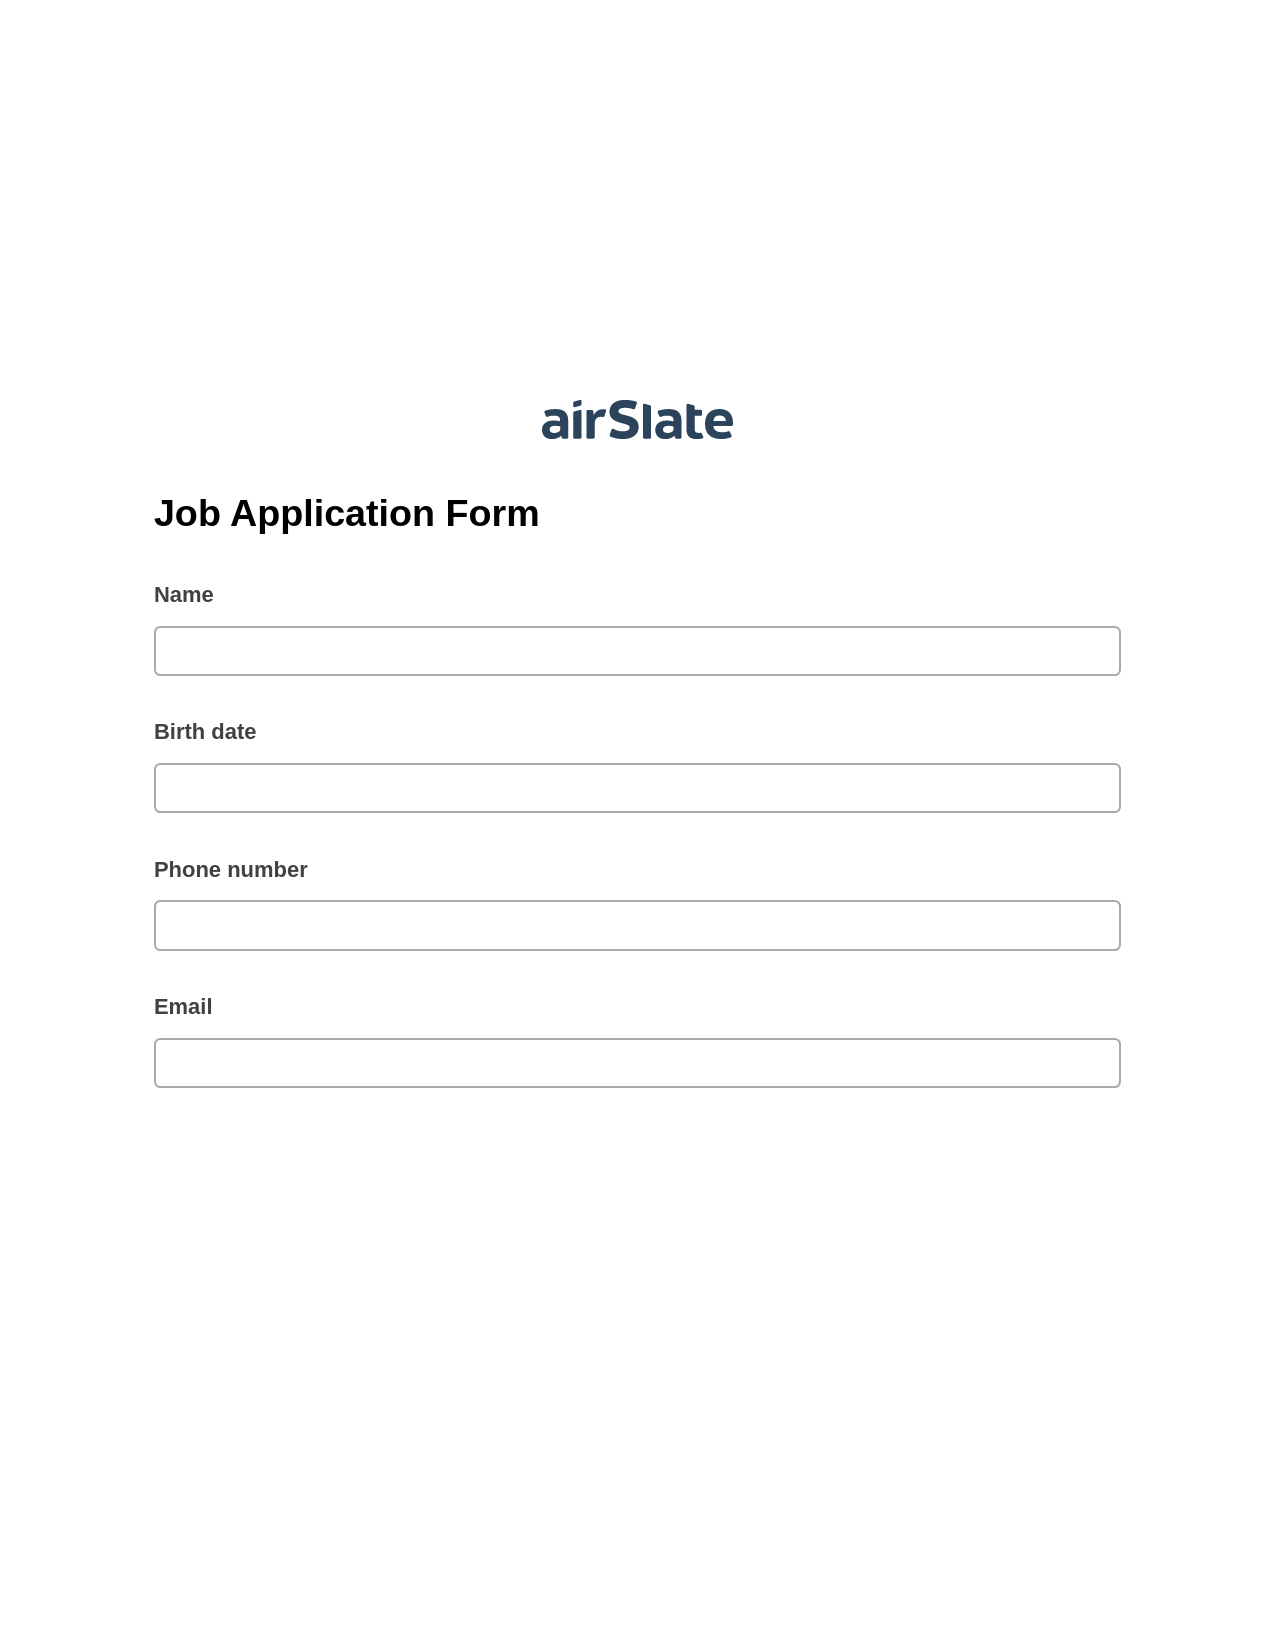 Multirole Job Application Form Pre-fill from MySQL Bot, Audit Trail Bot, Export to Formstack Documents Bot